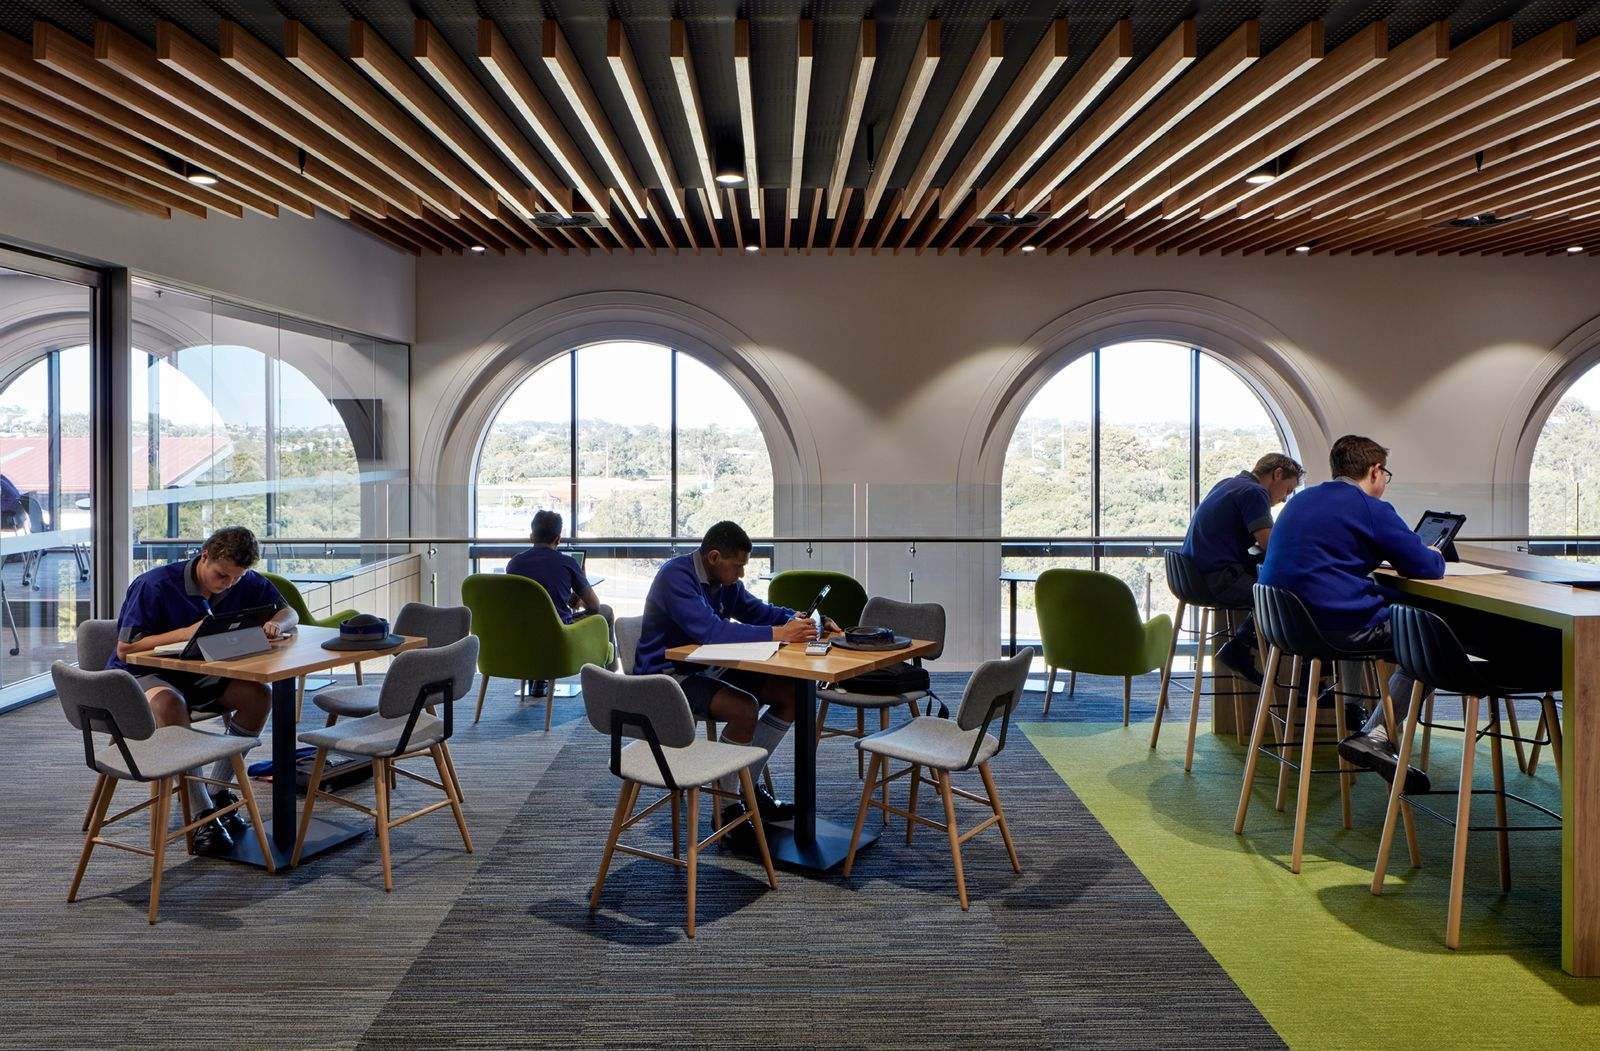 Anglican Church Grammar School Centenary Library by BSPN Architecture showing interior of school with school kids working